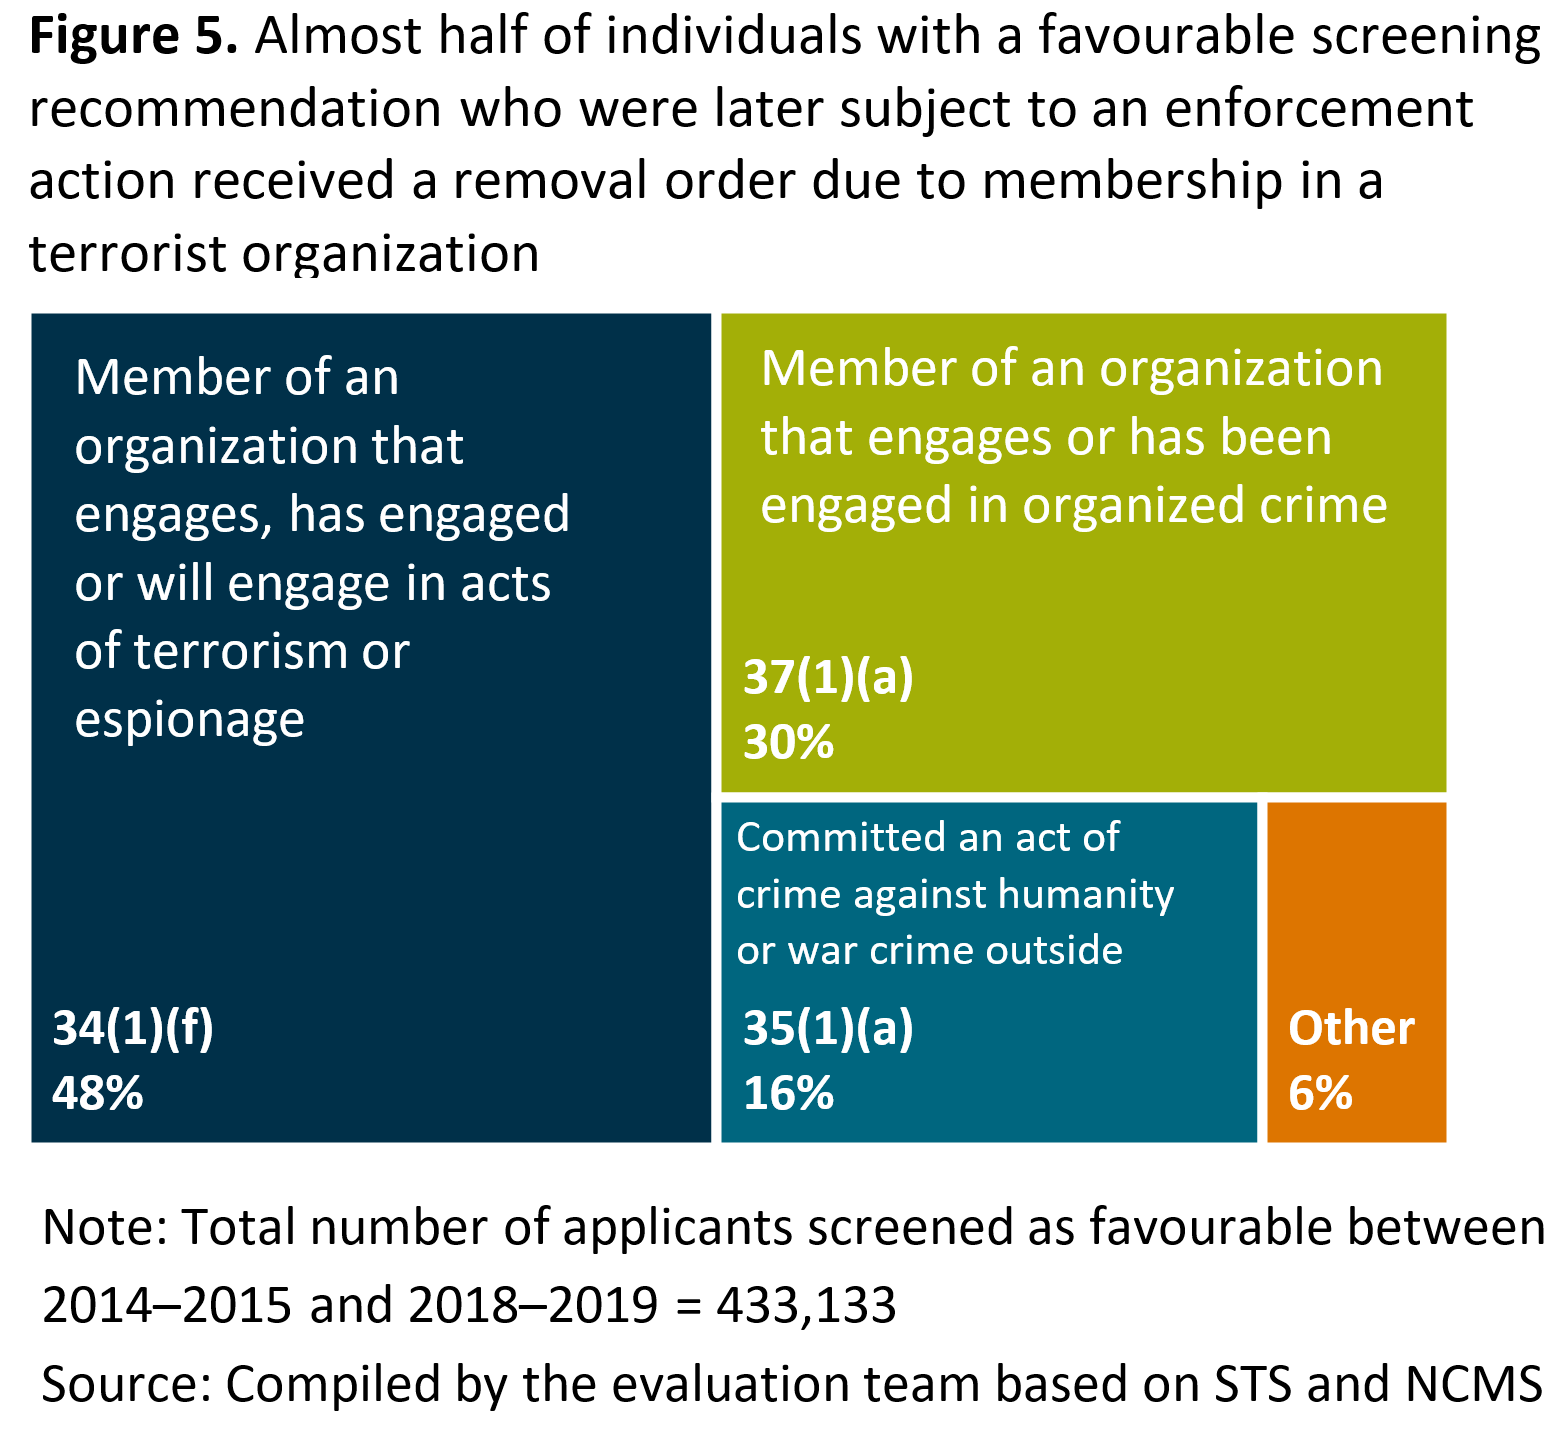 Figure 5 shows that almost half of individuals with a favourable screening recommendation who were later subject to an enforcement action received a removal order due to membership in a terrorist organization.